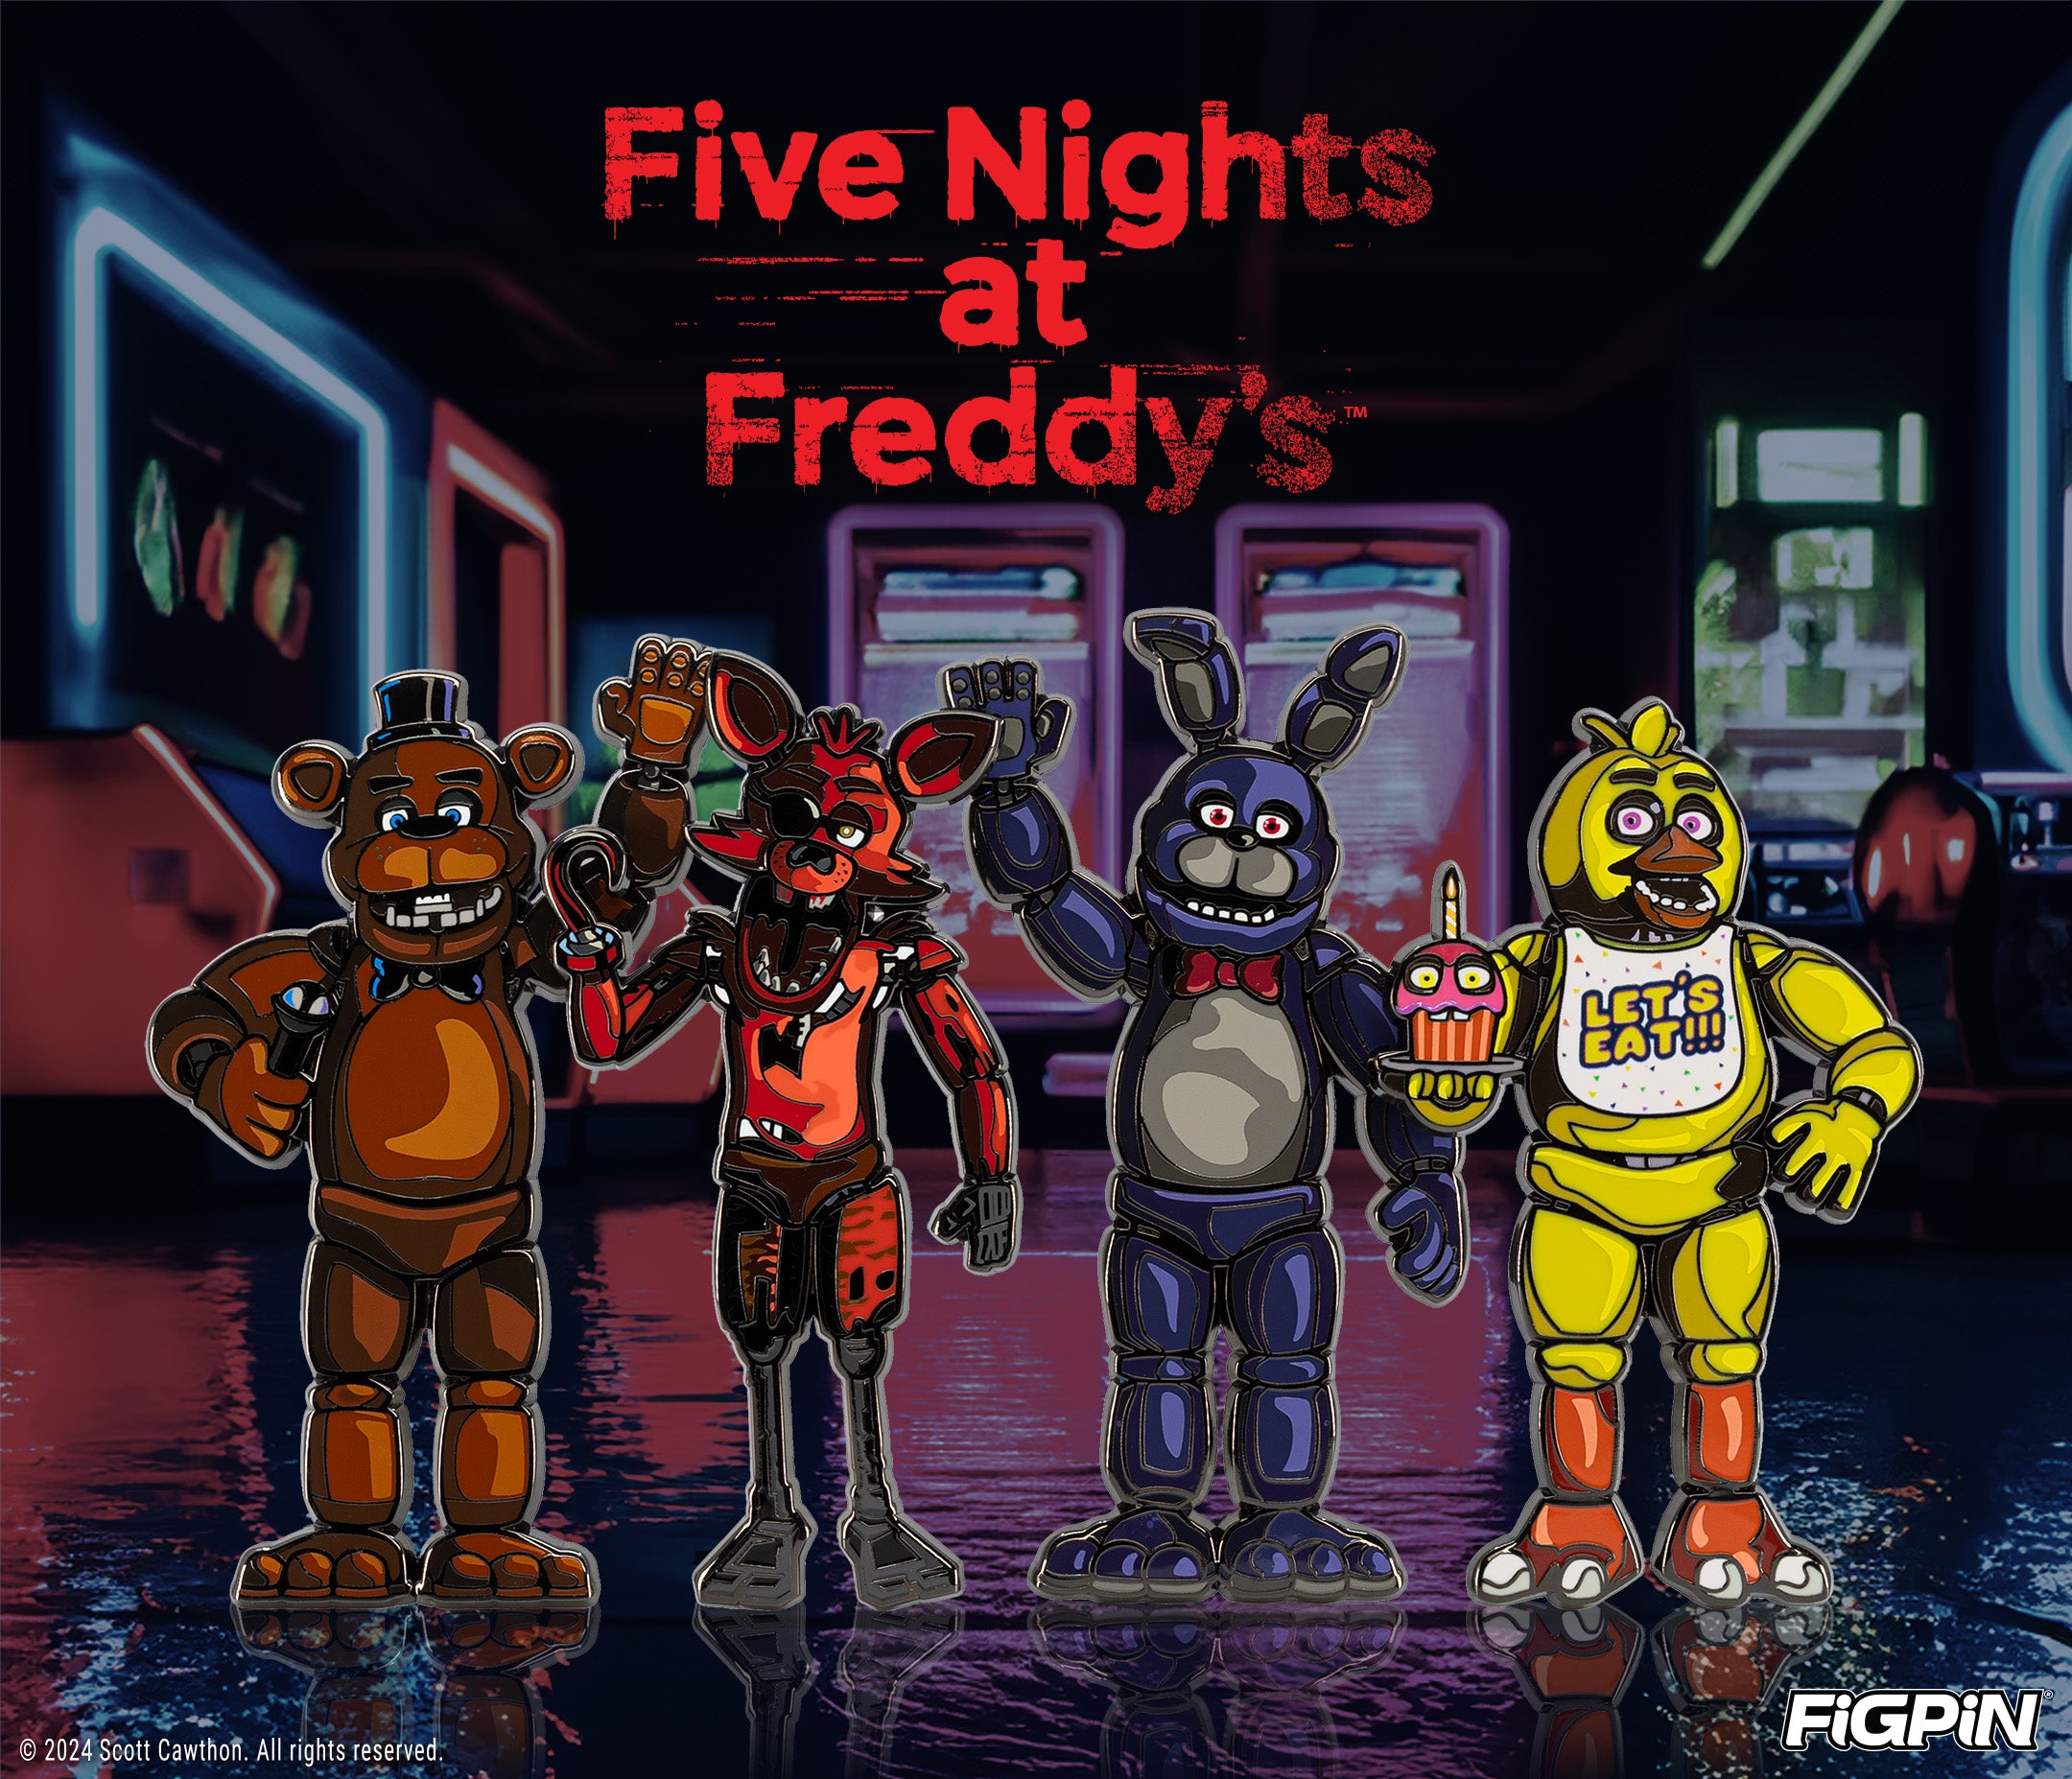 Let’s Party! Five Nights at Freddy’s Characters debut on FiGPiN.com